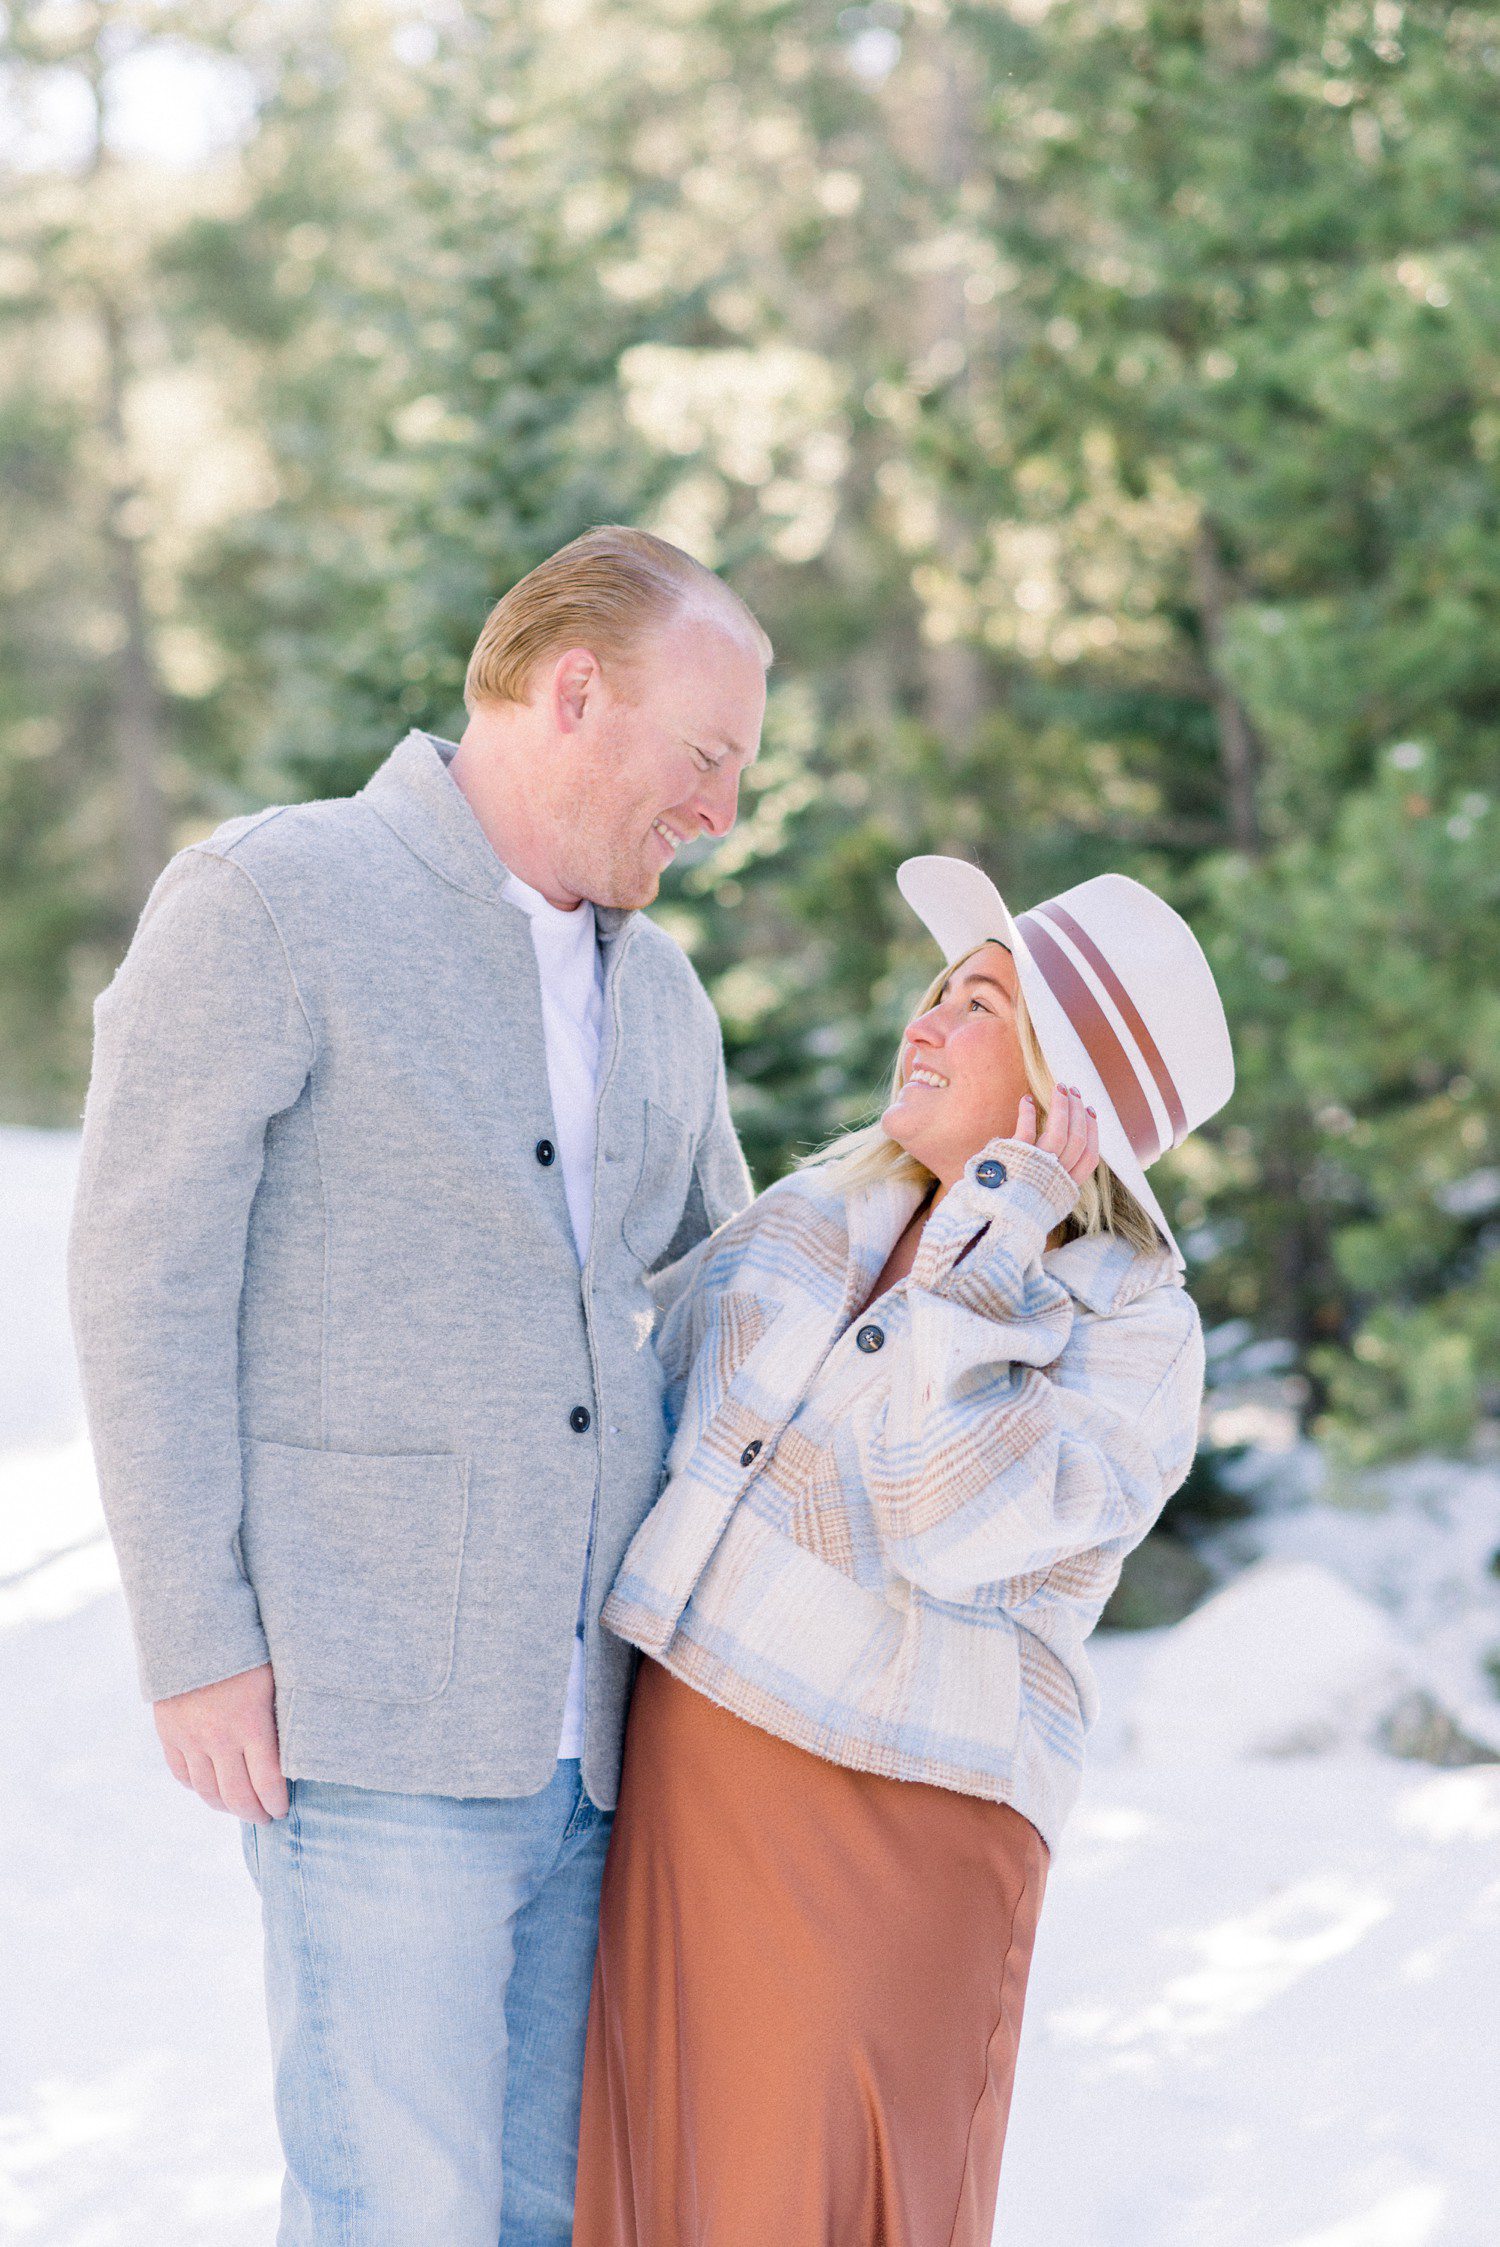 Vail Engagement Photos at Officer's Gulch with snow.